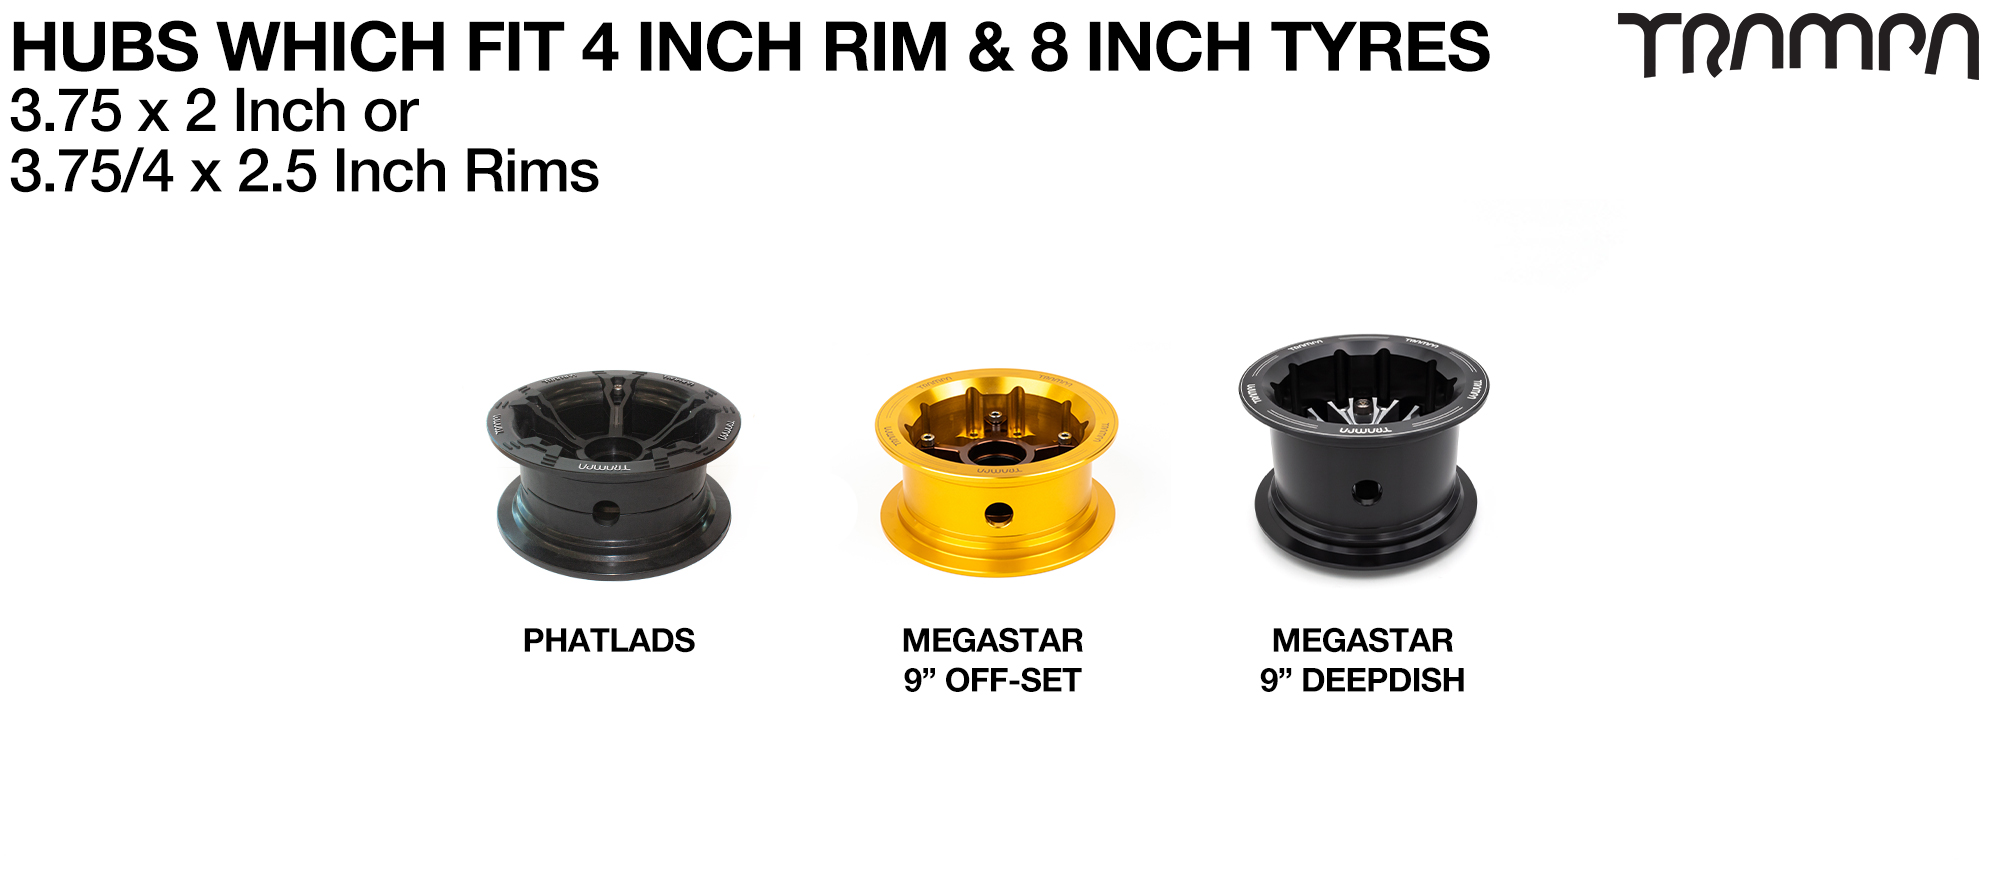 PRIMO POWERPLAY 8.5 Inch Tyre measure 4x 2.5x 8.5 Inch or 220x75mm with 4 inch rim fits all 4 inch Hubs